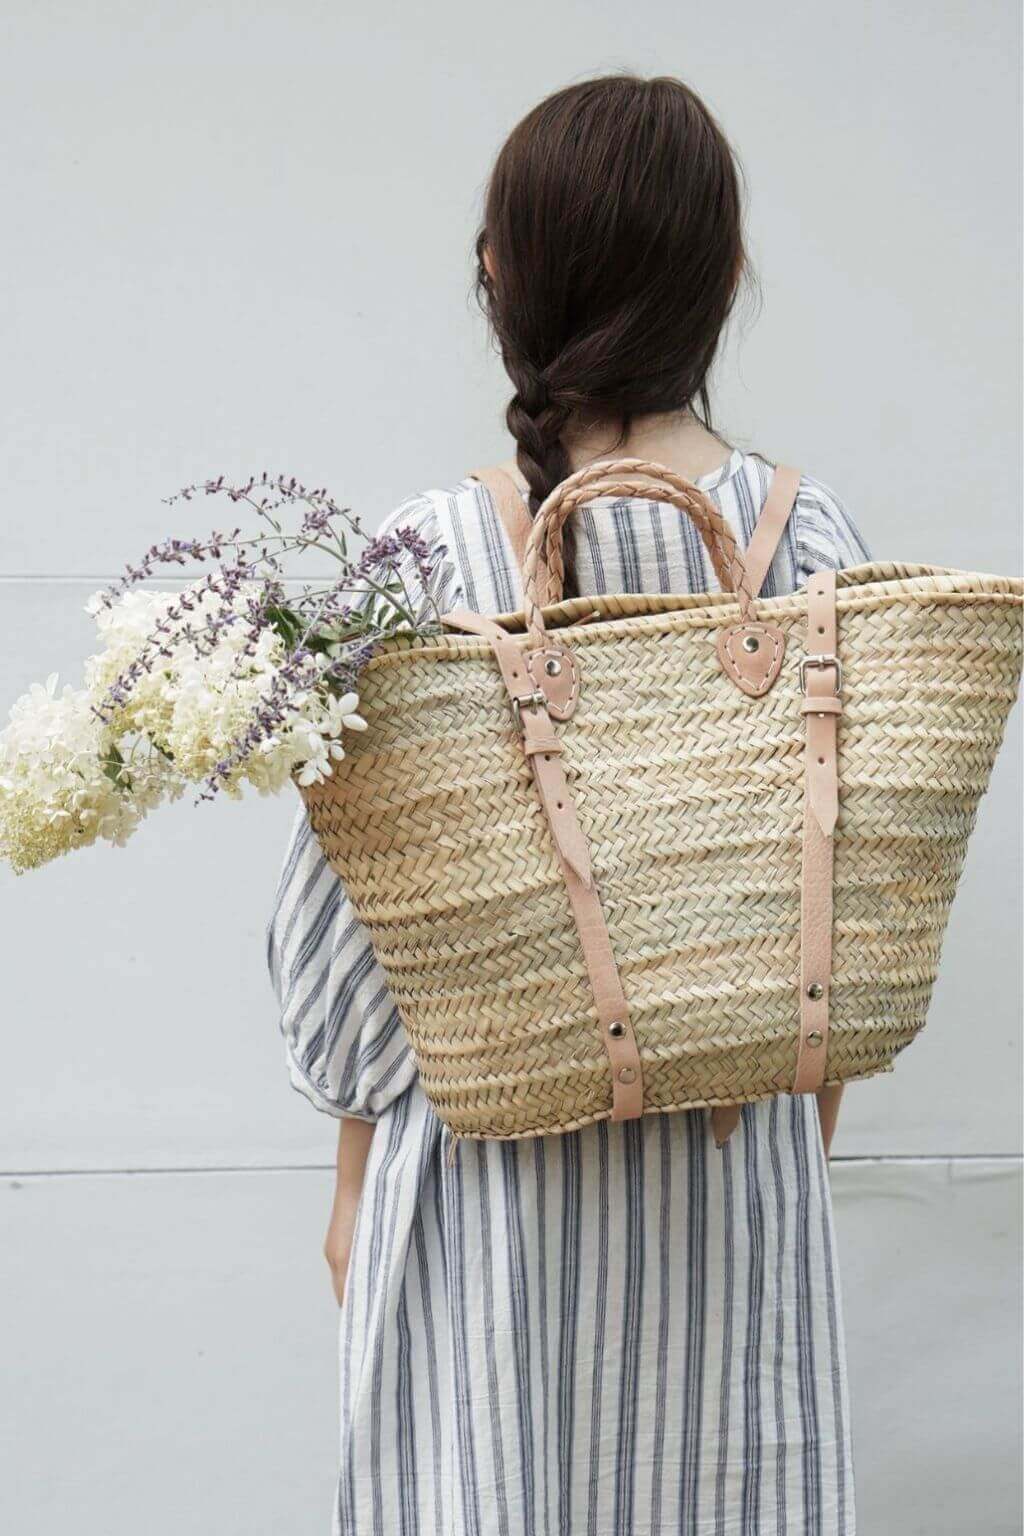  FRENCH BASKET straw bag with leather handles beach bag